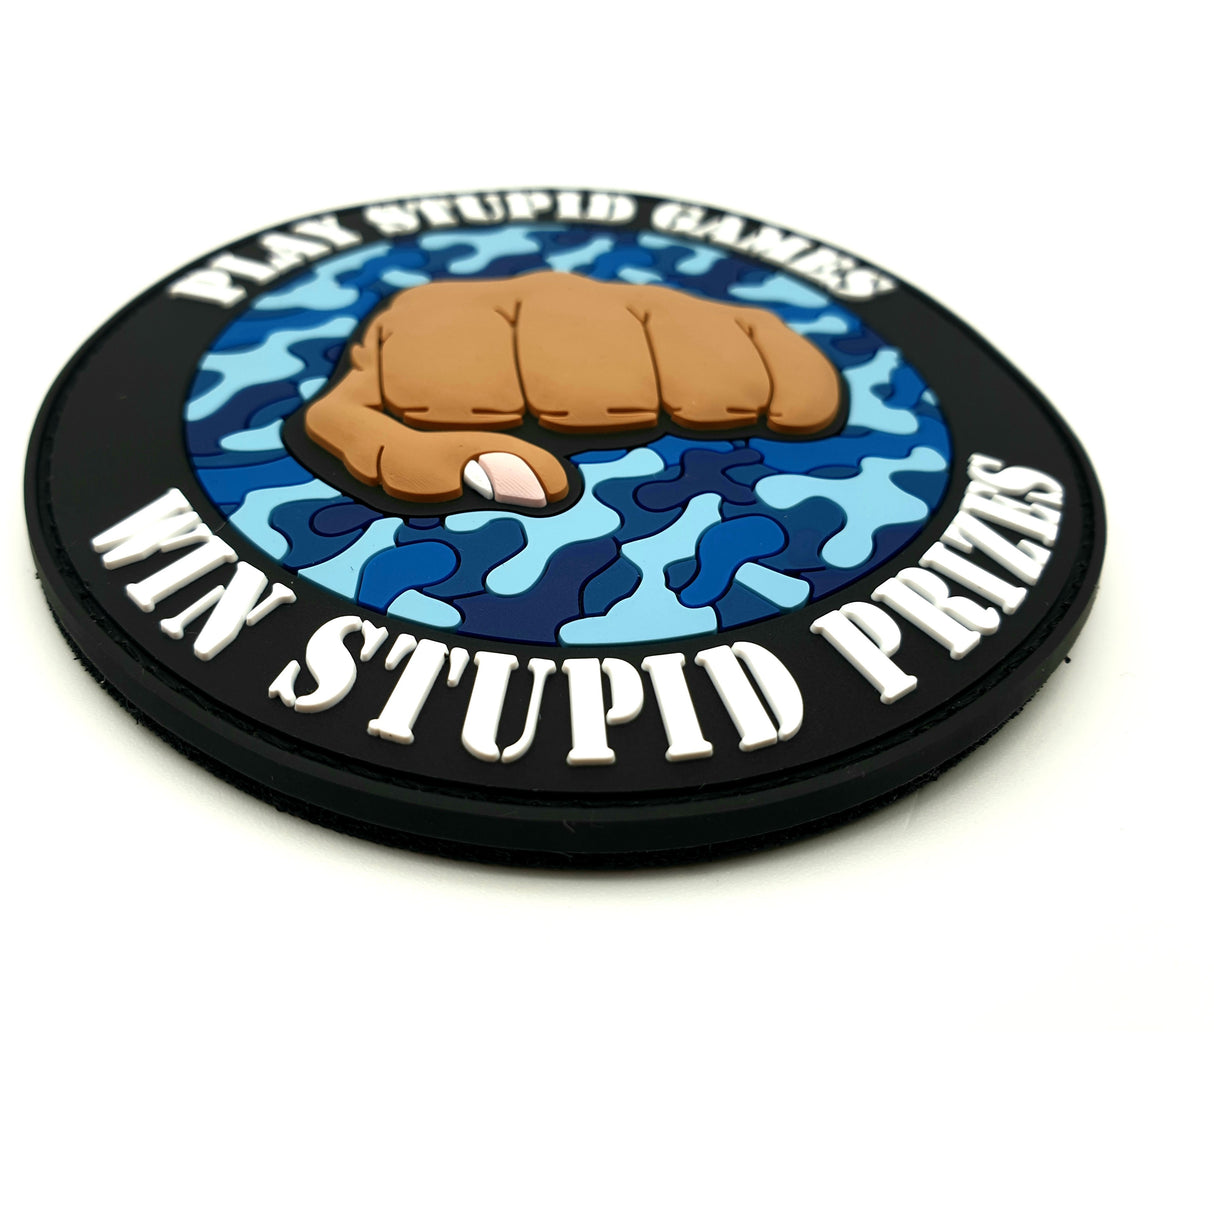 Play Stupid Games Win Stupid Prizes Rubberpatch - Polizeimemesshop